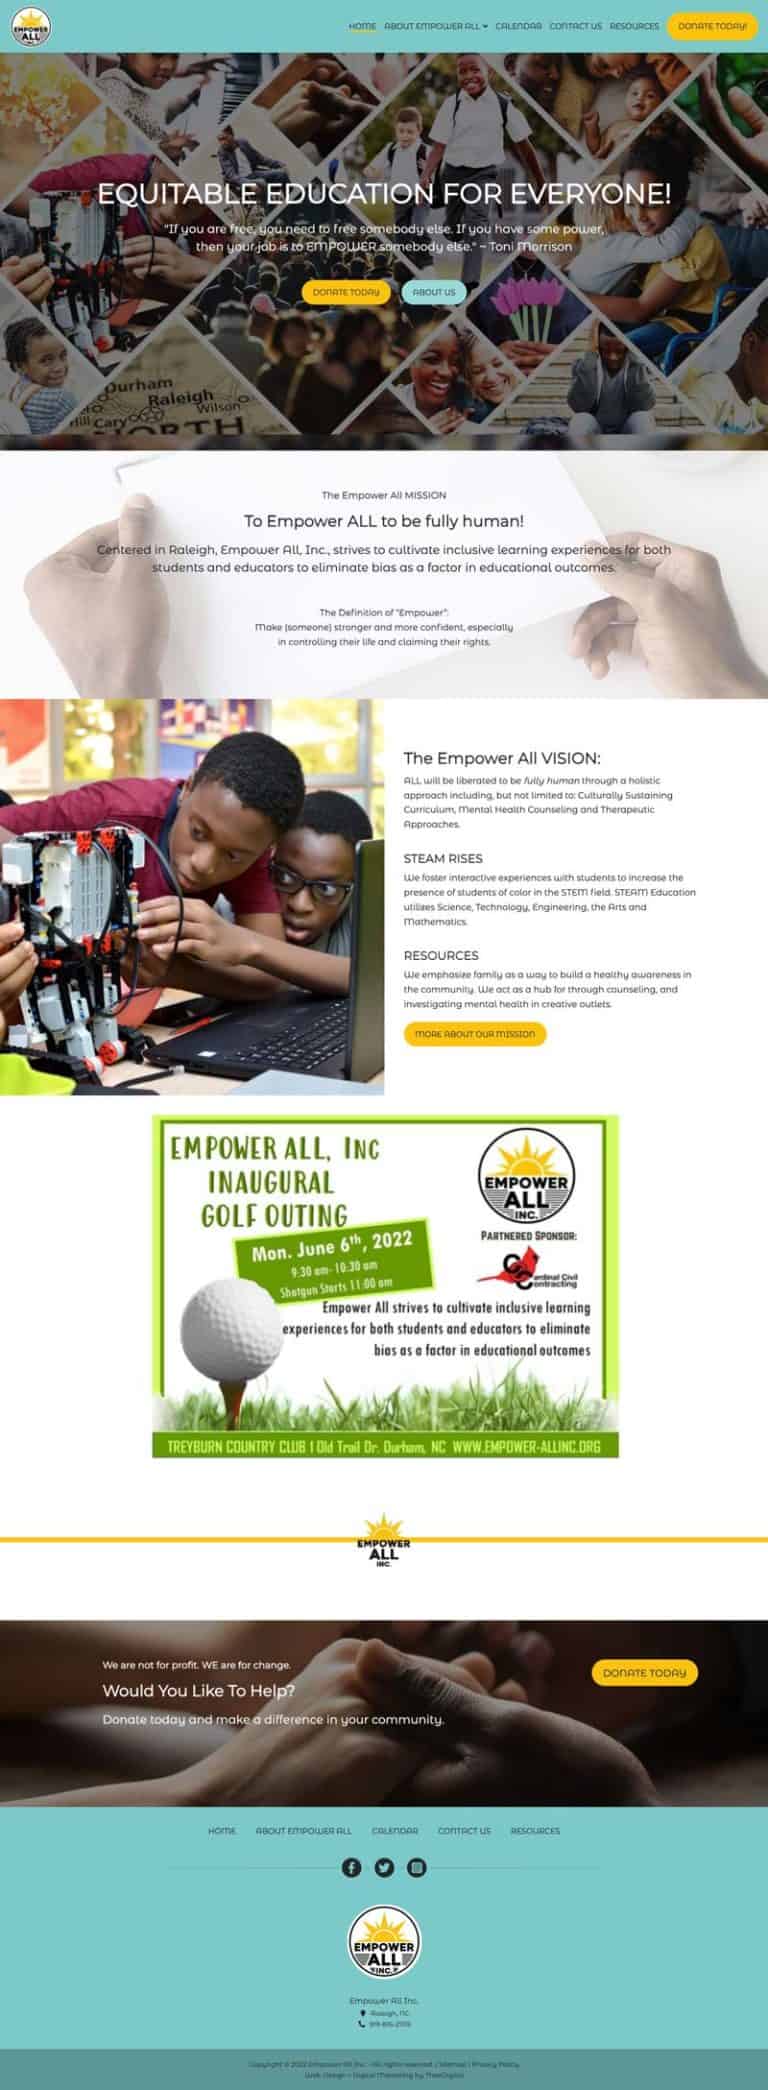 Responsive Web Design for an Education and Social Equality Non-Profit